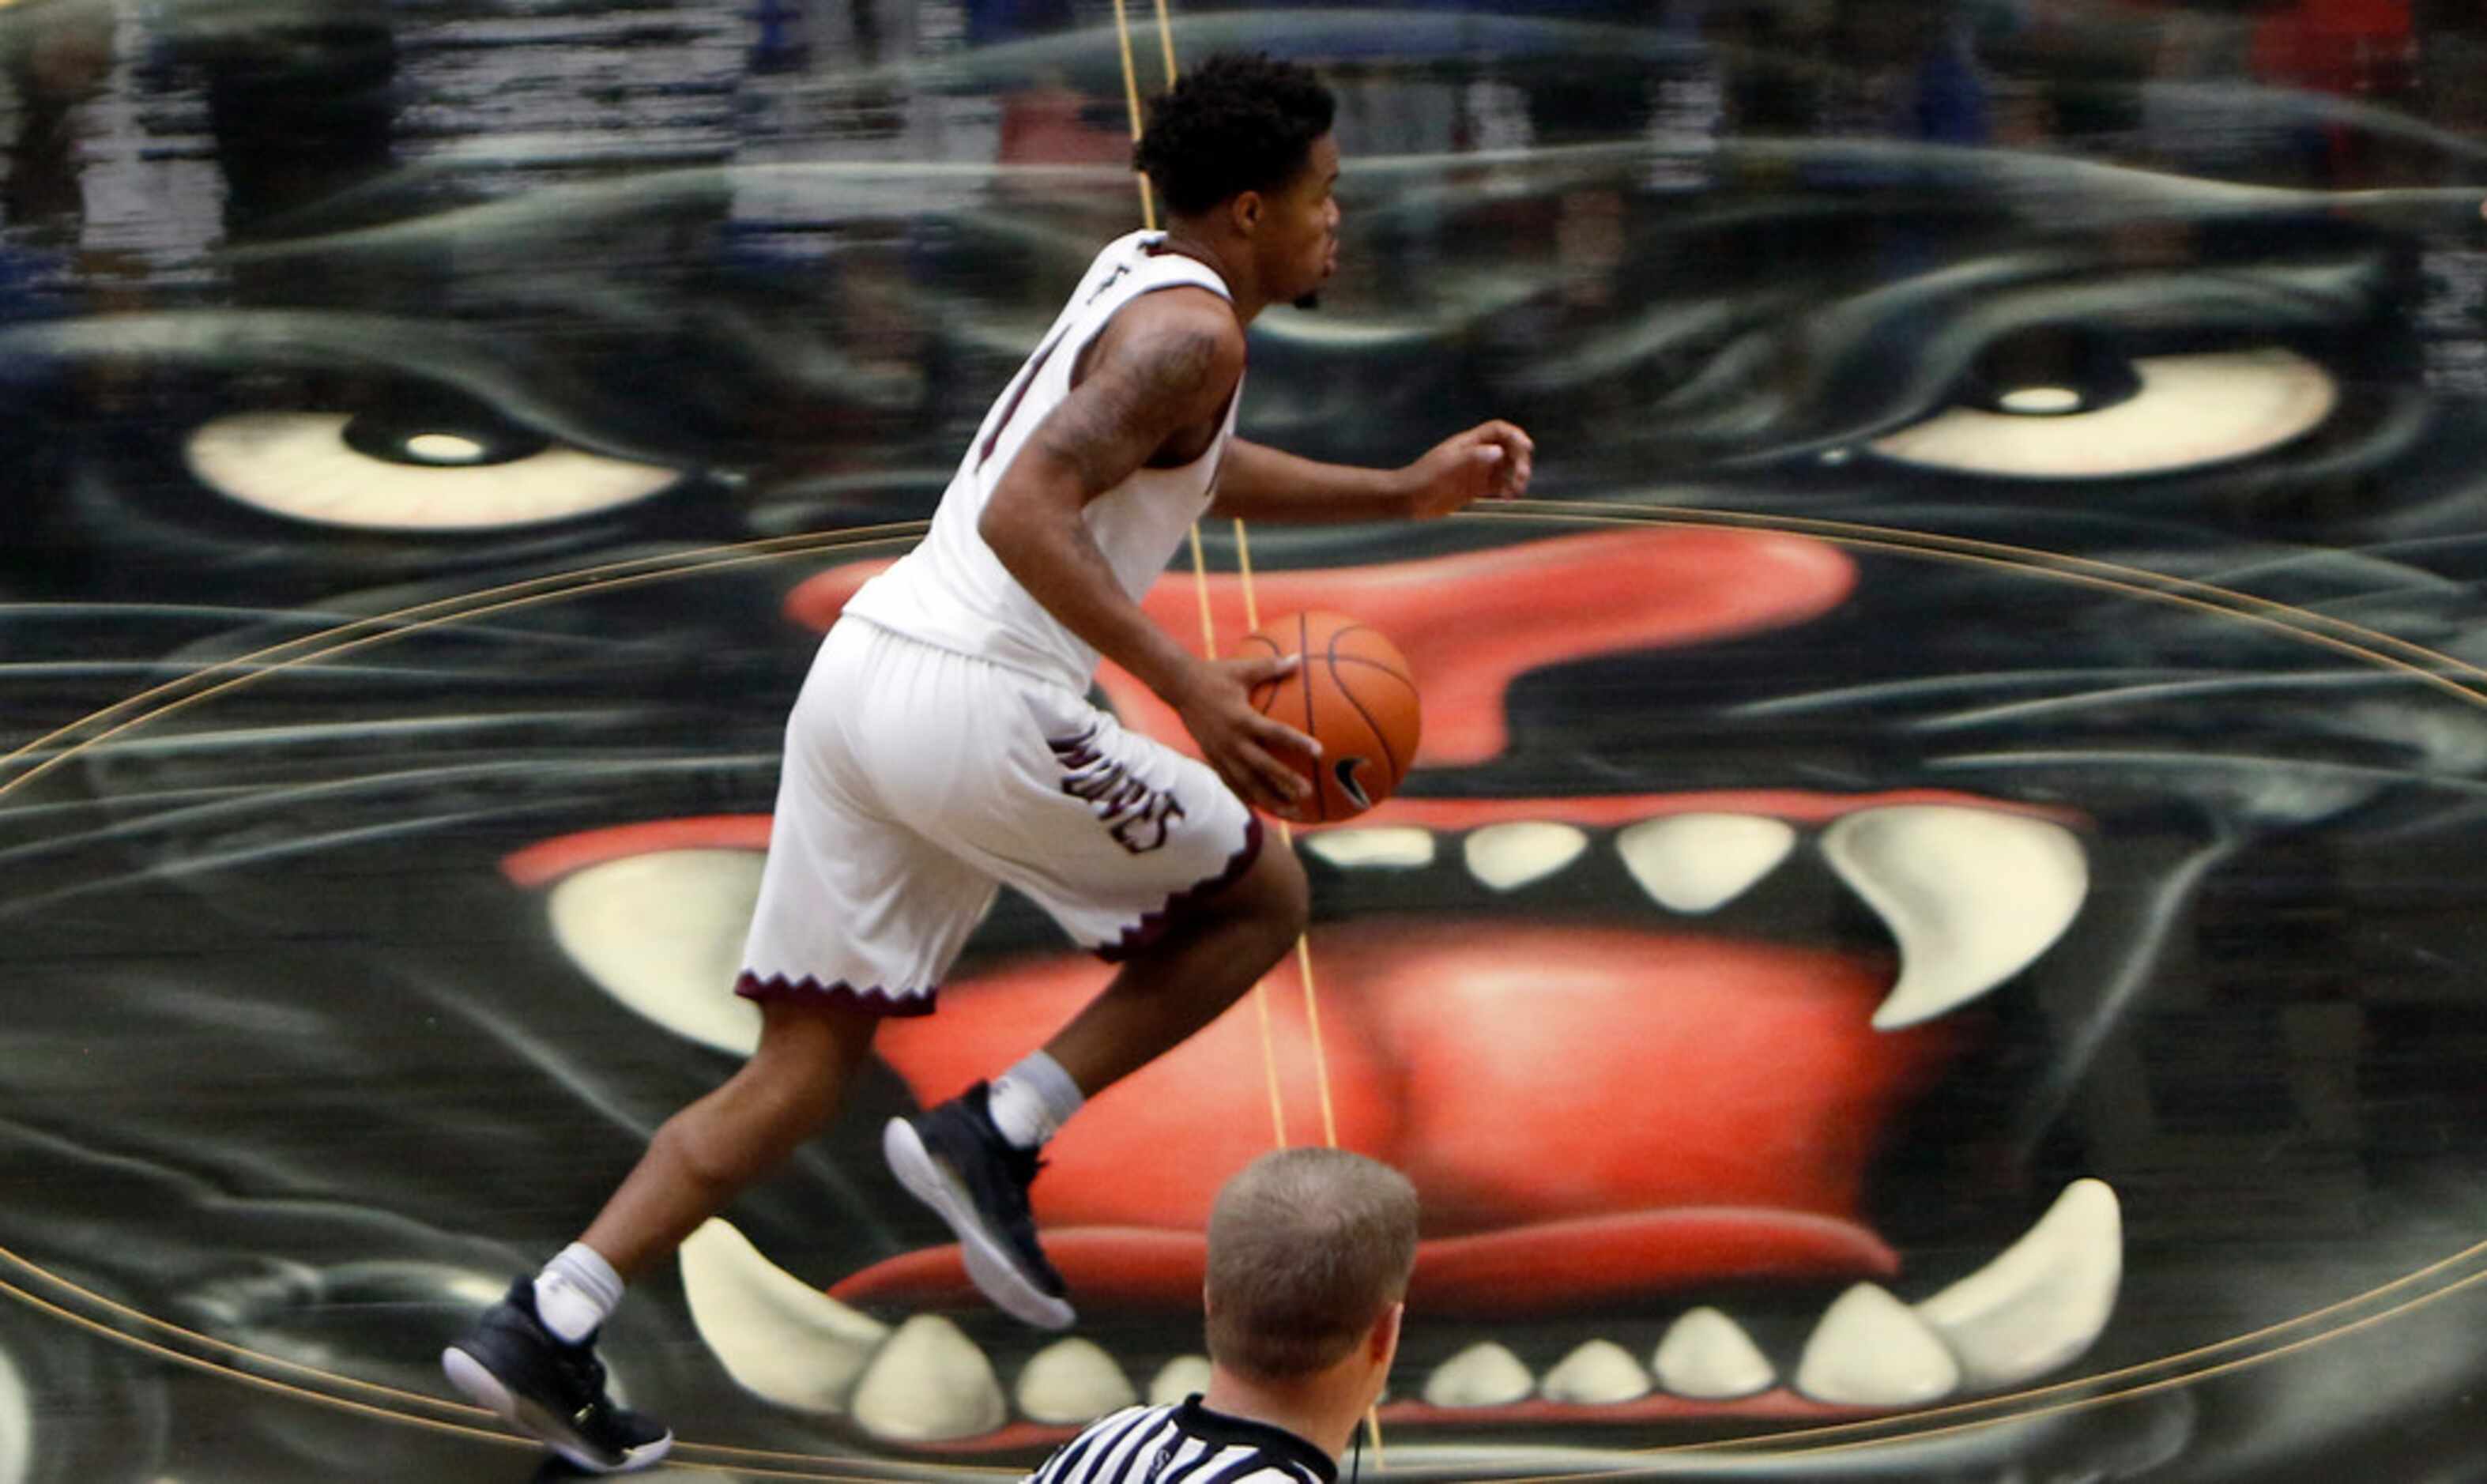 Mansfield Timberview senior Stacy Sneed (1) dribbles past mid-court as he sets up a play...